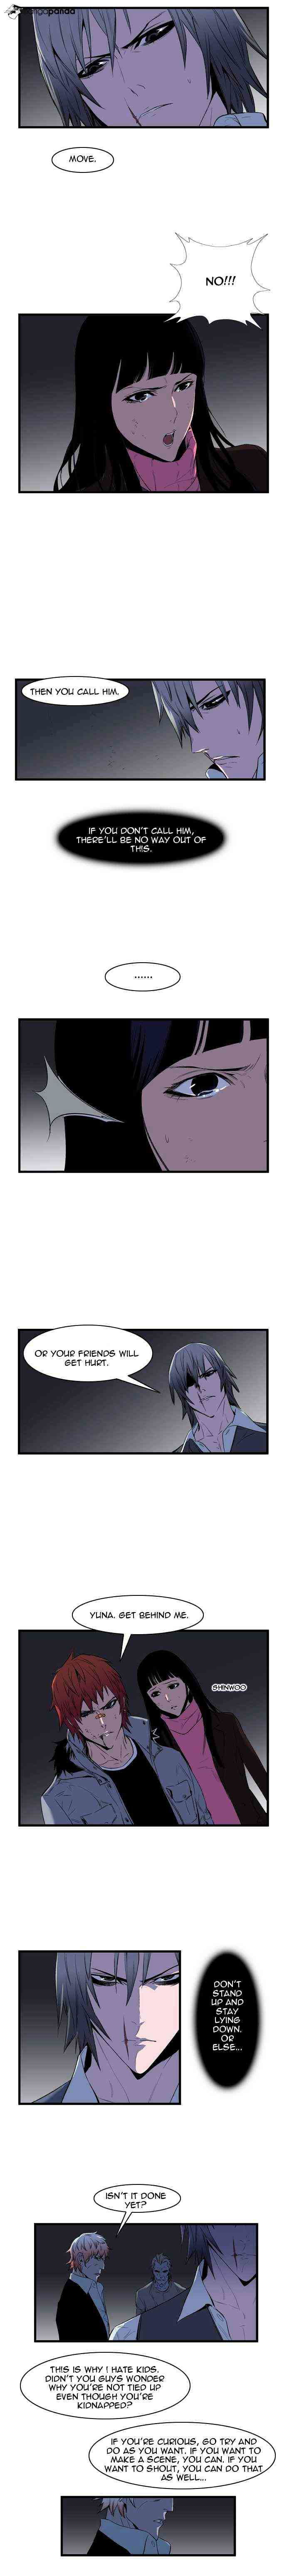 Noblesse Chapter 67 page 4